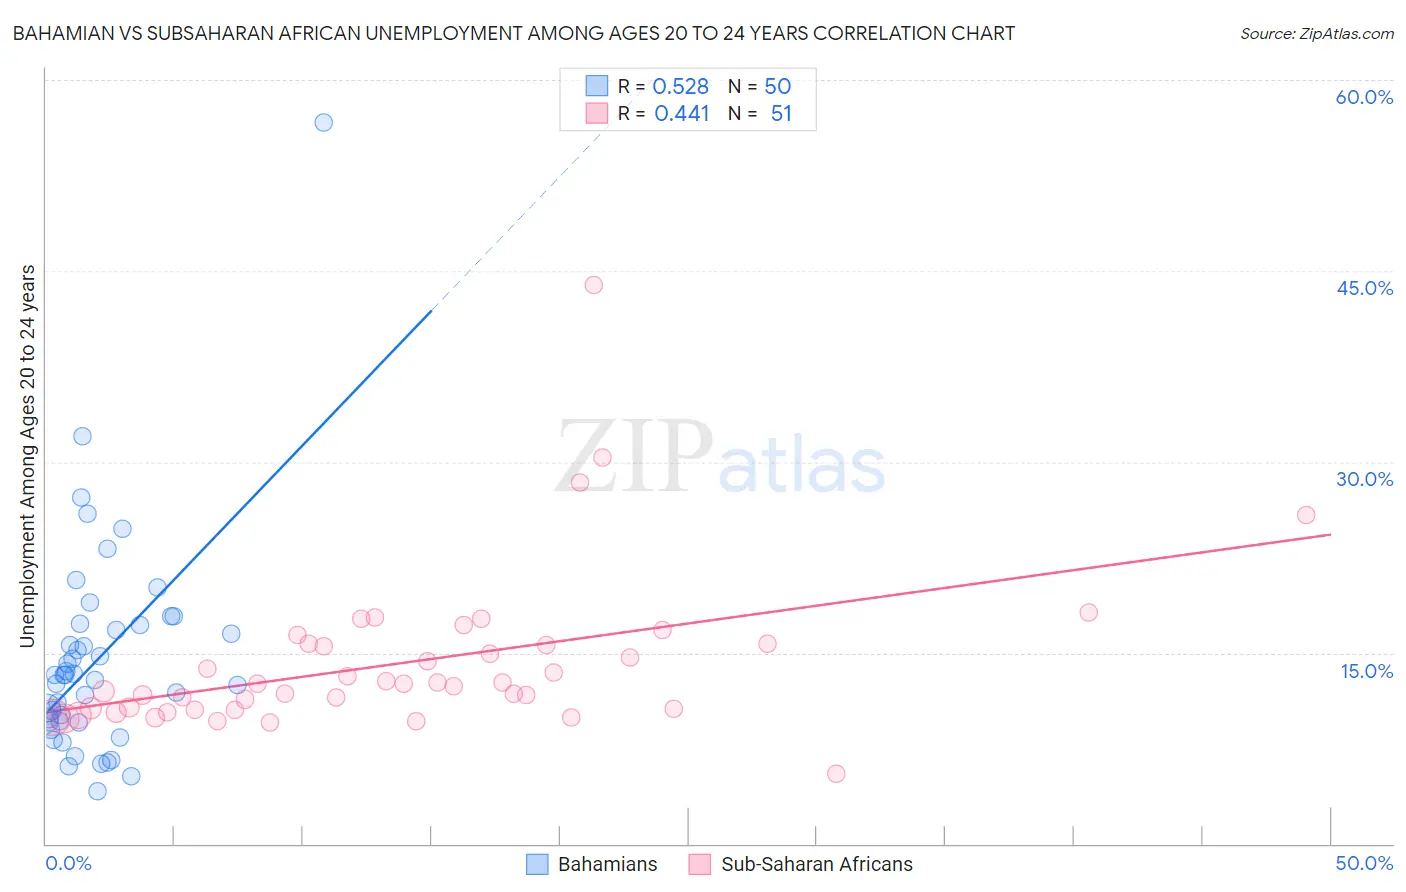 Bahamian vs Subsaharan African Unemployment Among Ages 20 to 24 years